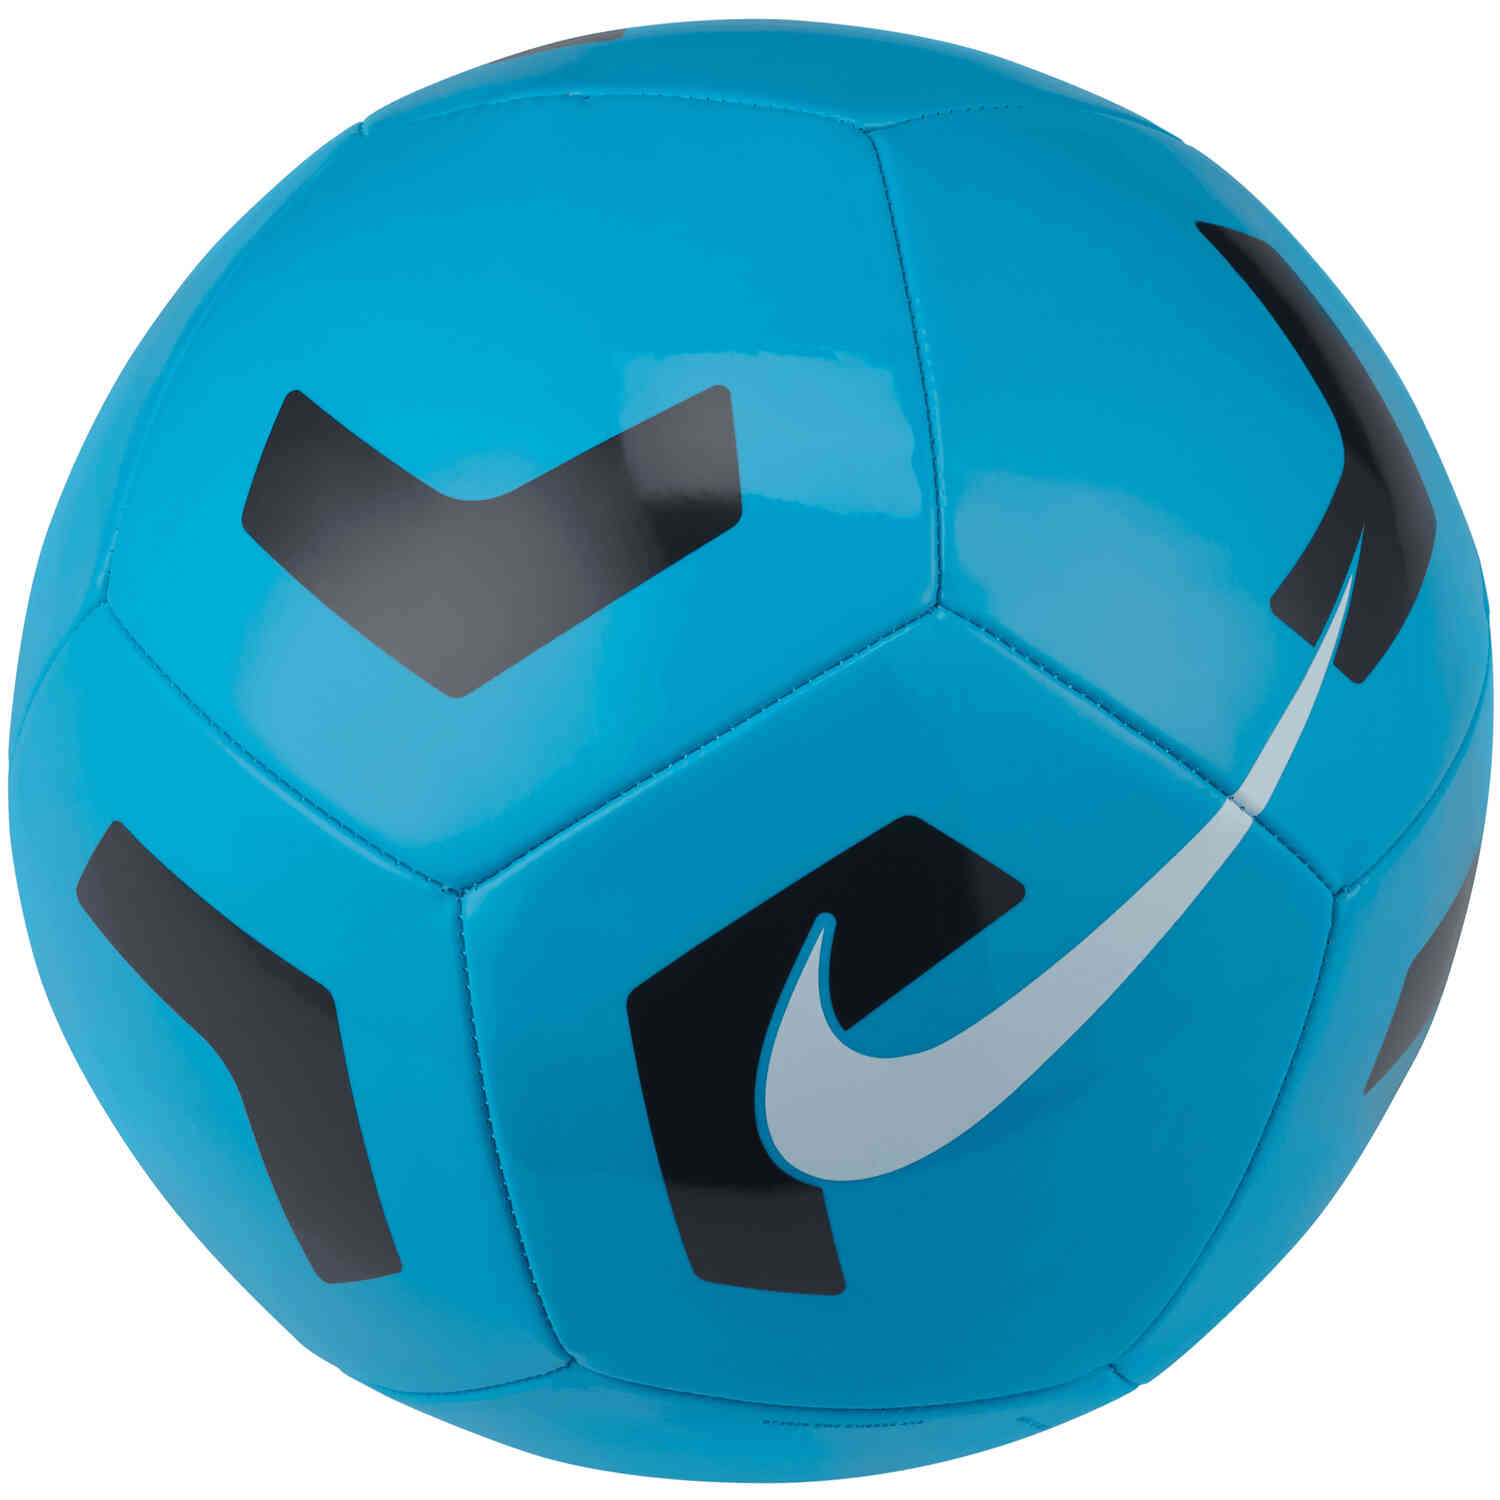 Nike Pitch Training Soccer Ball – Light Blue Fury & Black with White